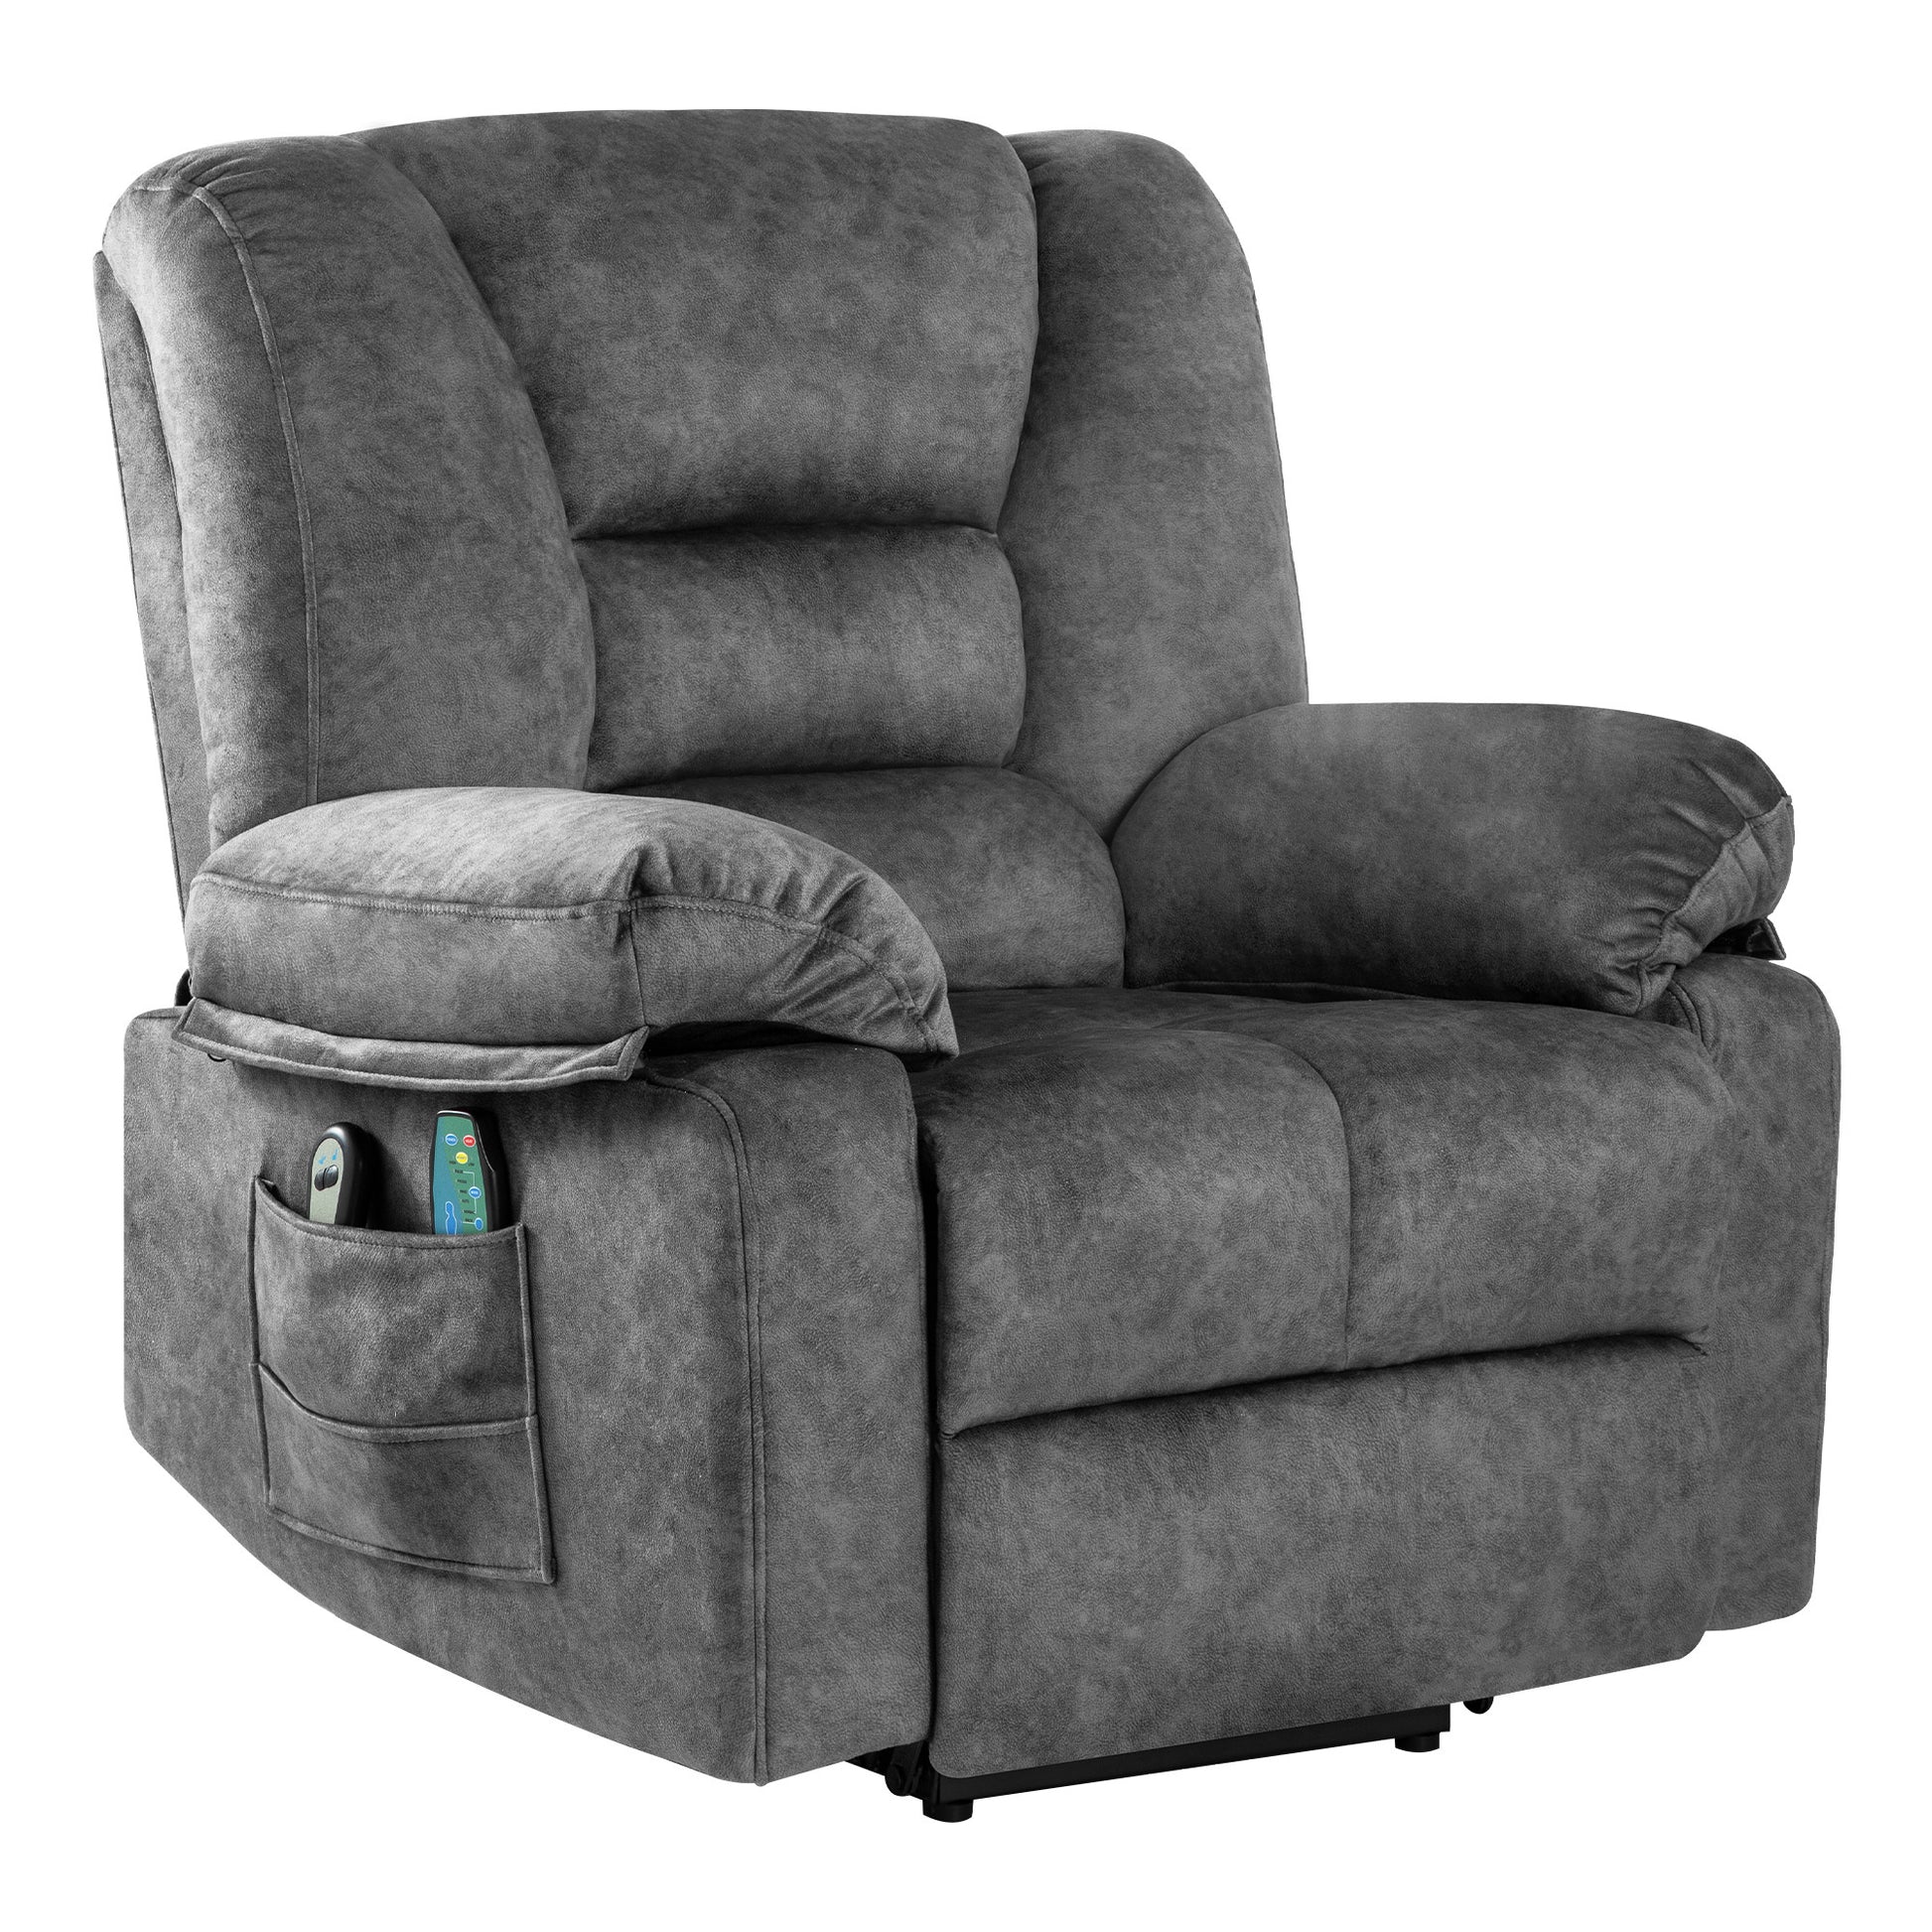 Power Lift Recliner Chair Sofa For Elderly With